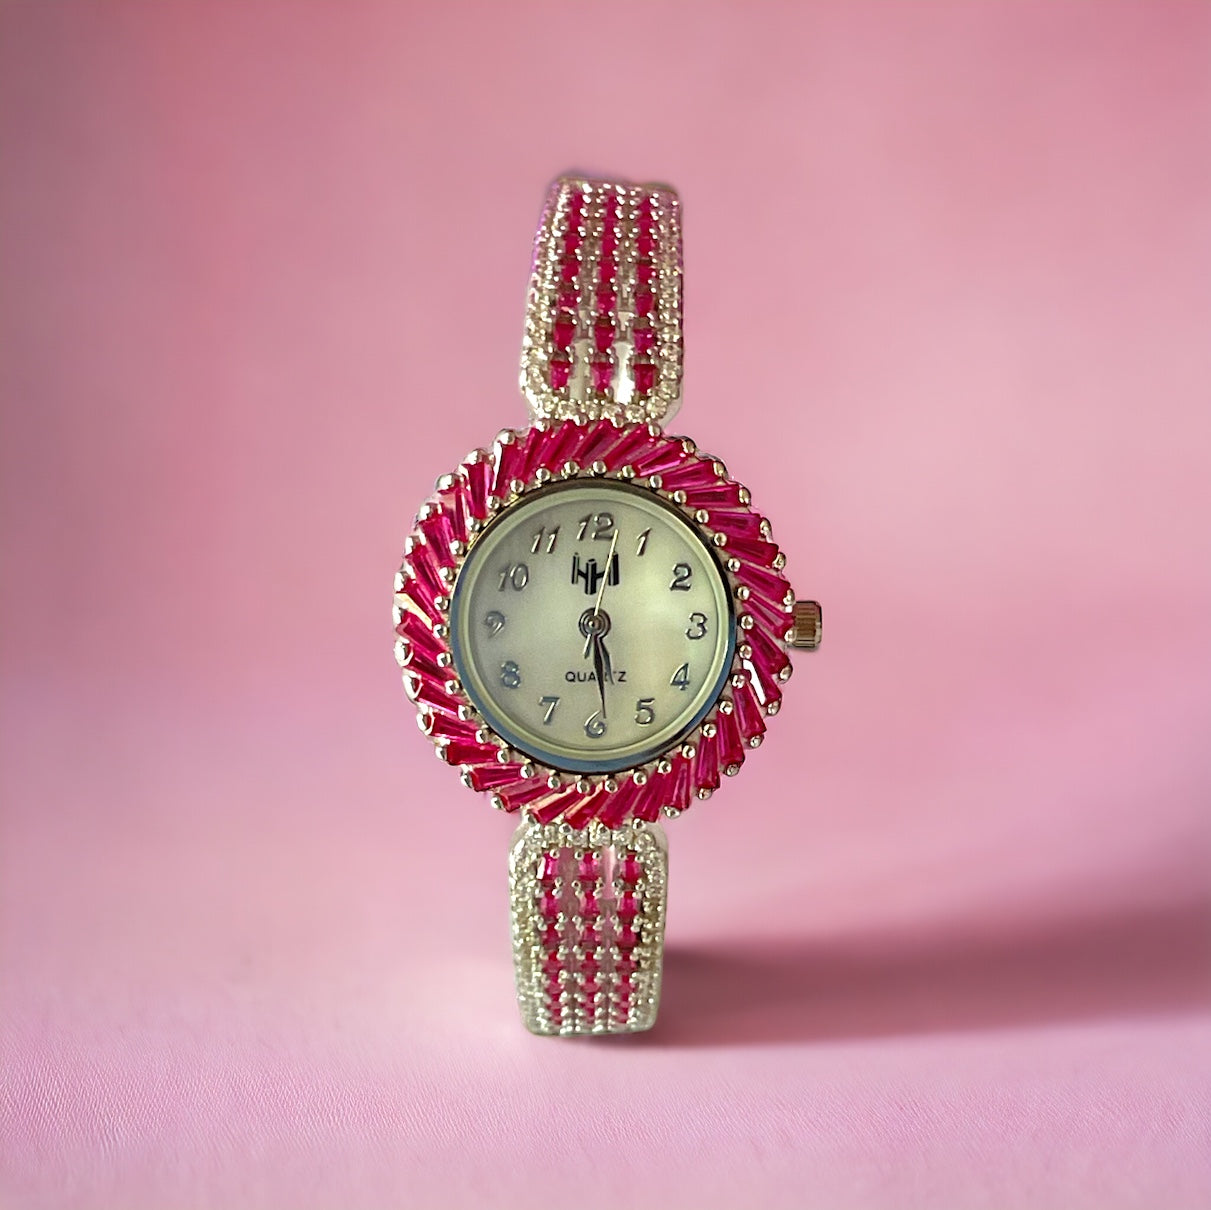 a pink watch with a white face on a pink background